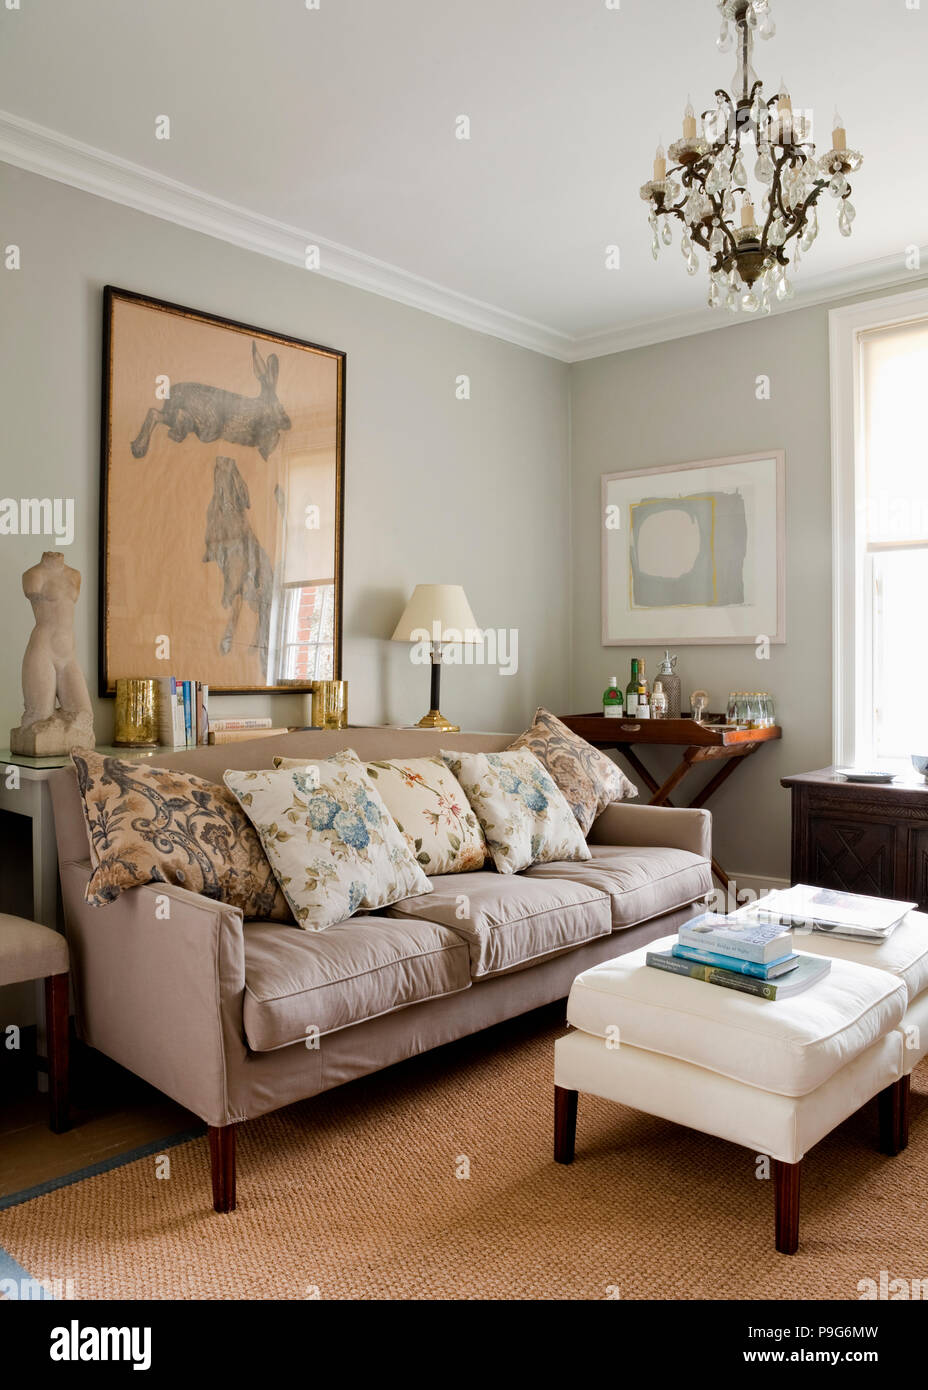 Floral Linen Cushions On Beige Sofa In Pale Grey Living Room